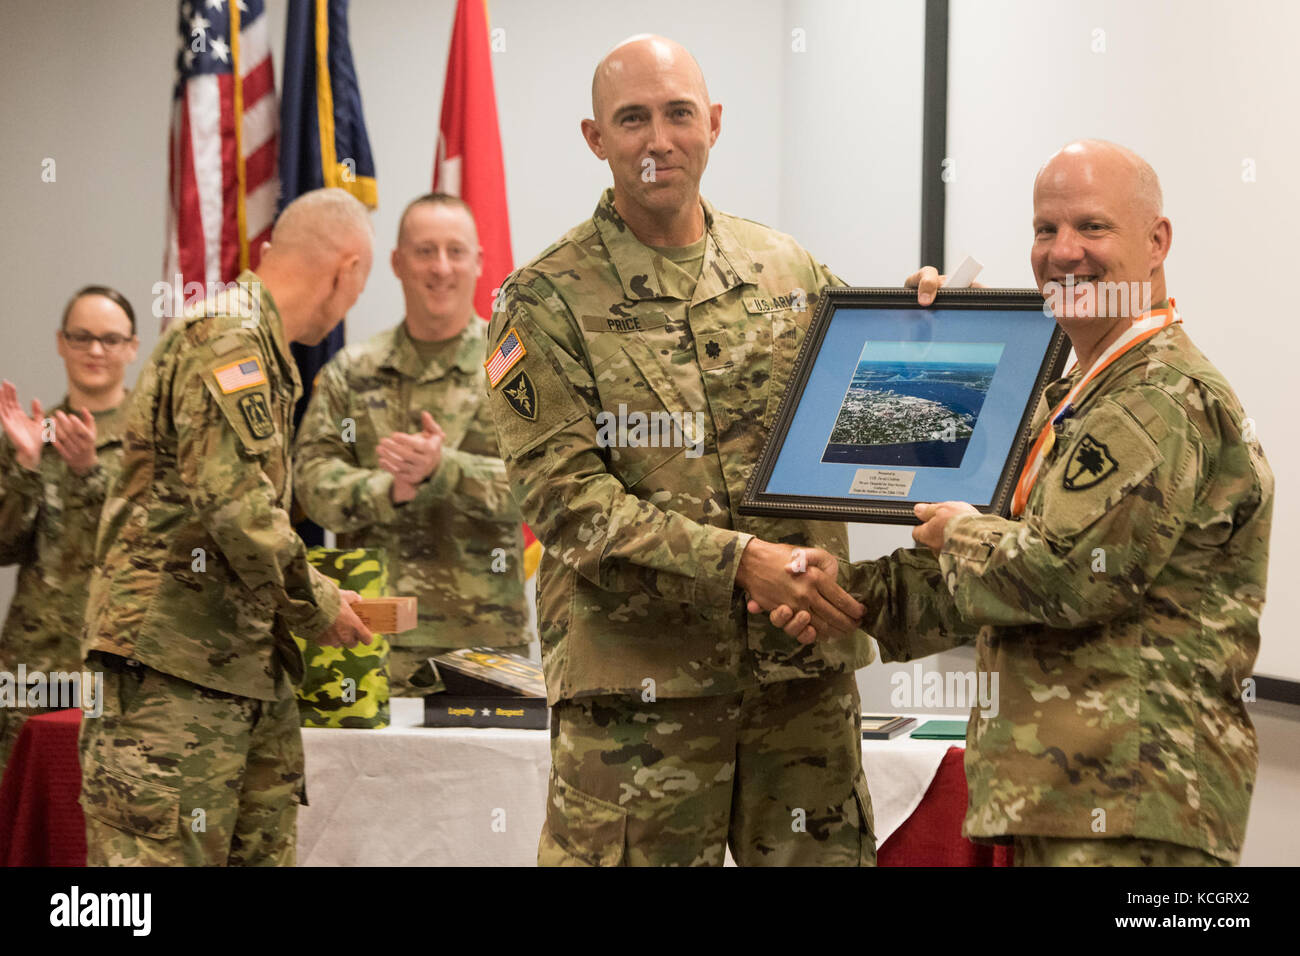 U.S. Army Col. David D. Coldren, Signal Officer and leader of the South Carolina National Guard's cyber initiatives,  retires at a ceremony held at the Joint Forces Headquarters building in Columbia, South Carolina, July 8, 2017. Coldren began his military career in 1987, serving 2 years in the Florida National Guard, 8 years in the Indiana National Guard, culminating with 18 years in the South Carolina National Guard. (U.S. Army National Guard photo by Sgt. Brian Calhoun) Stock Photo